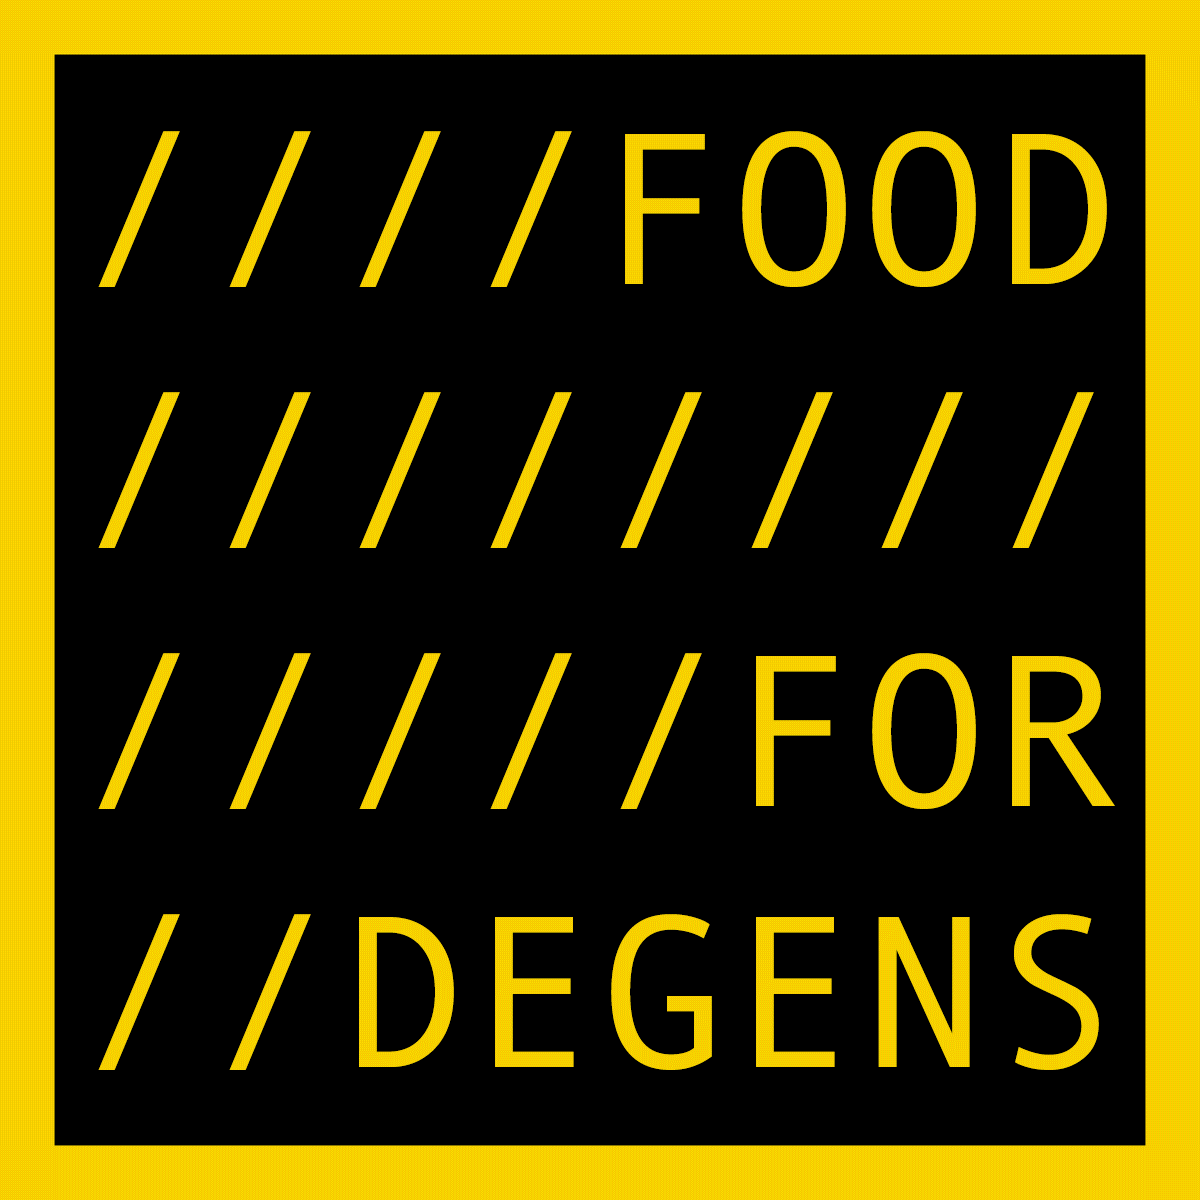 Food For Degens - Exposition Kevin Abosch